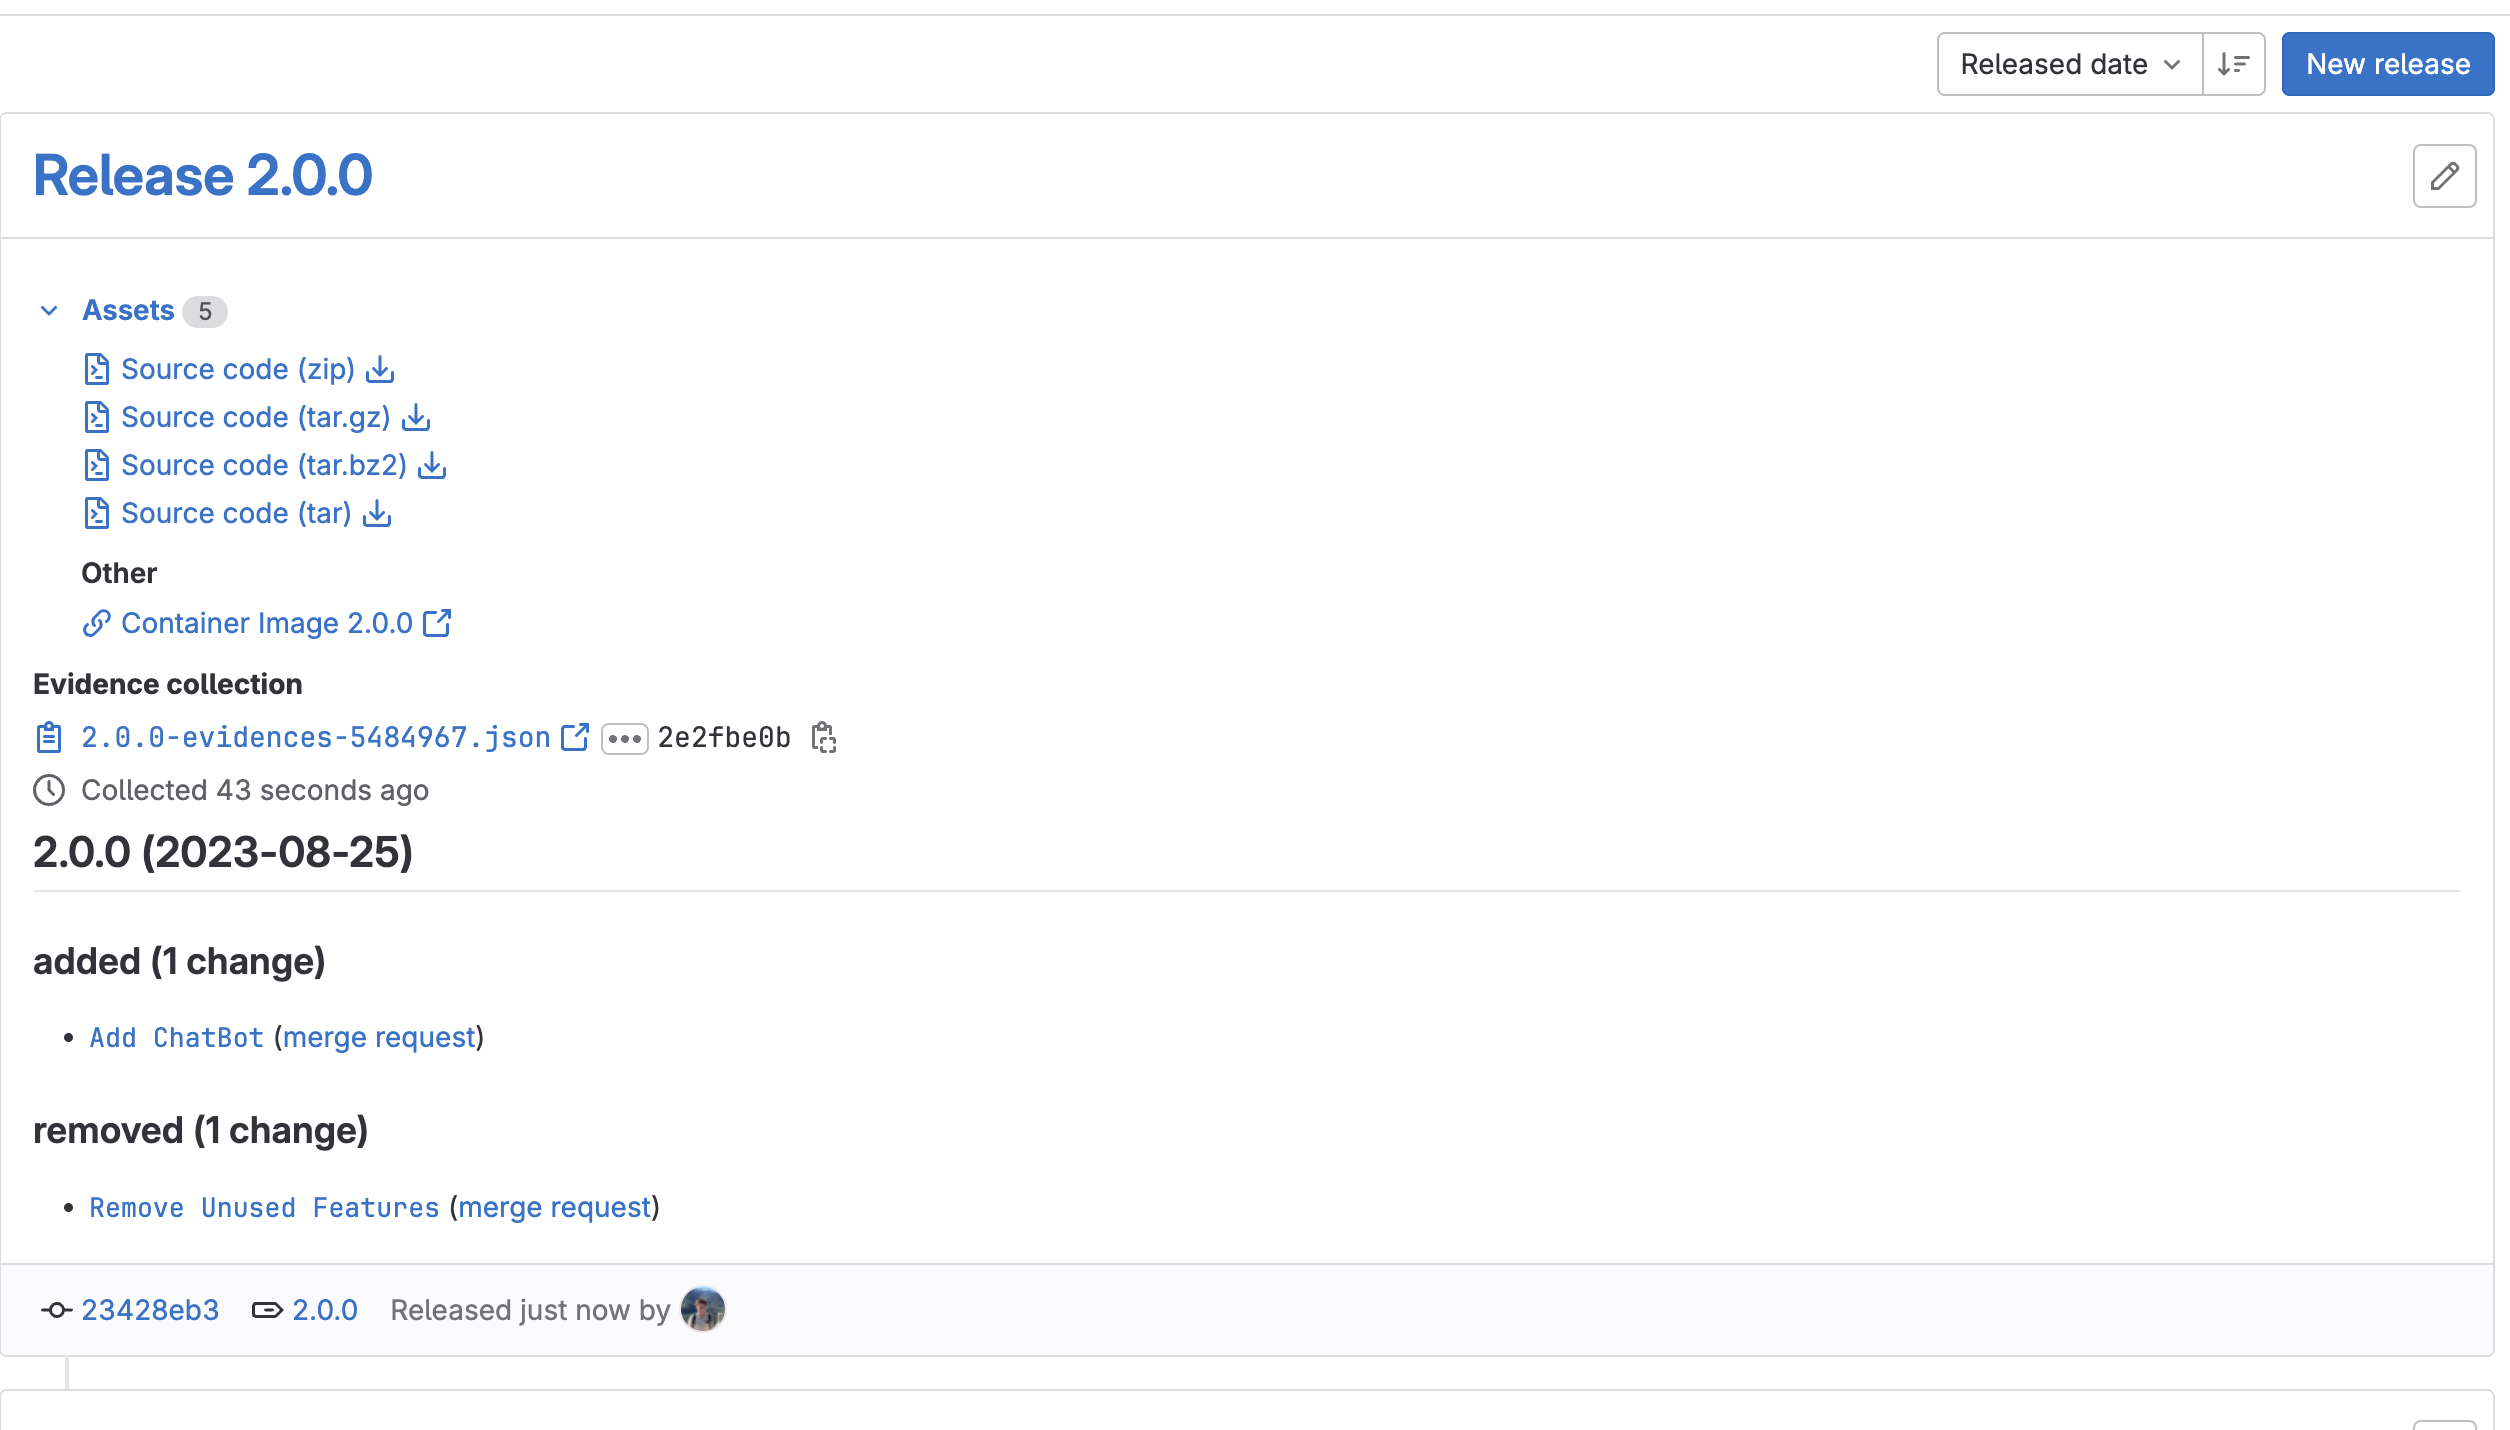 The GitLab release UI showing a release for version 2.0.0